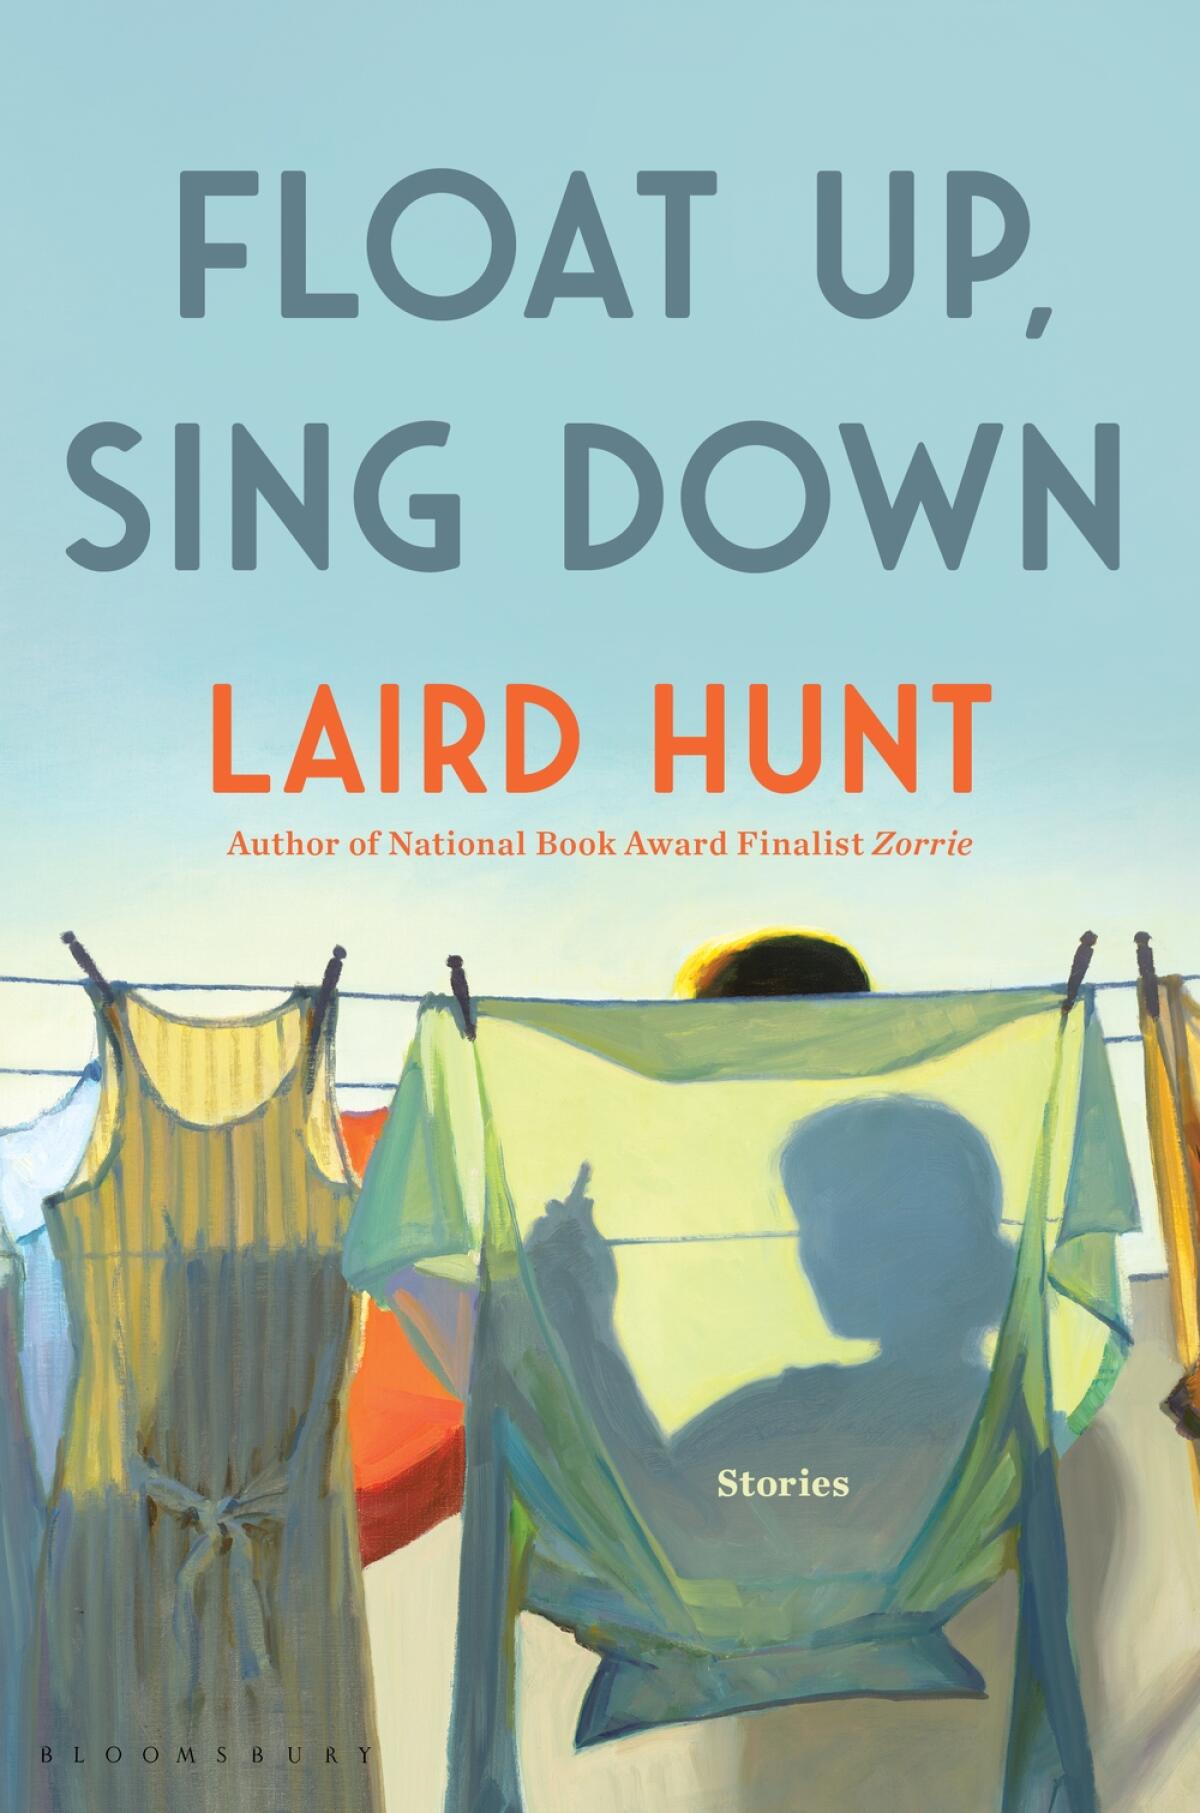 "Float Up, Sing Down" by Laird Hunt